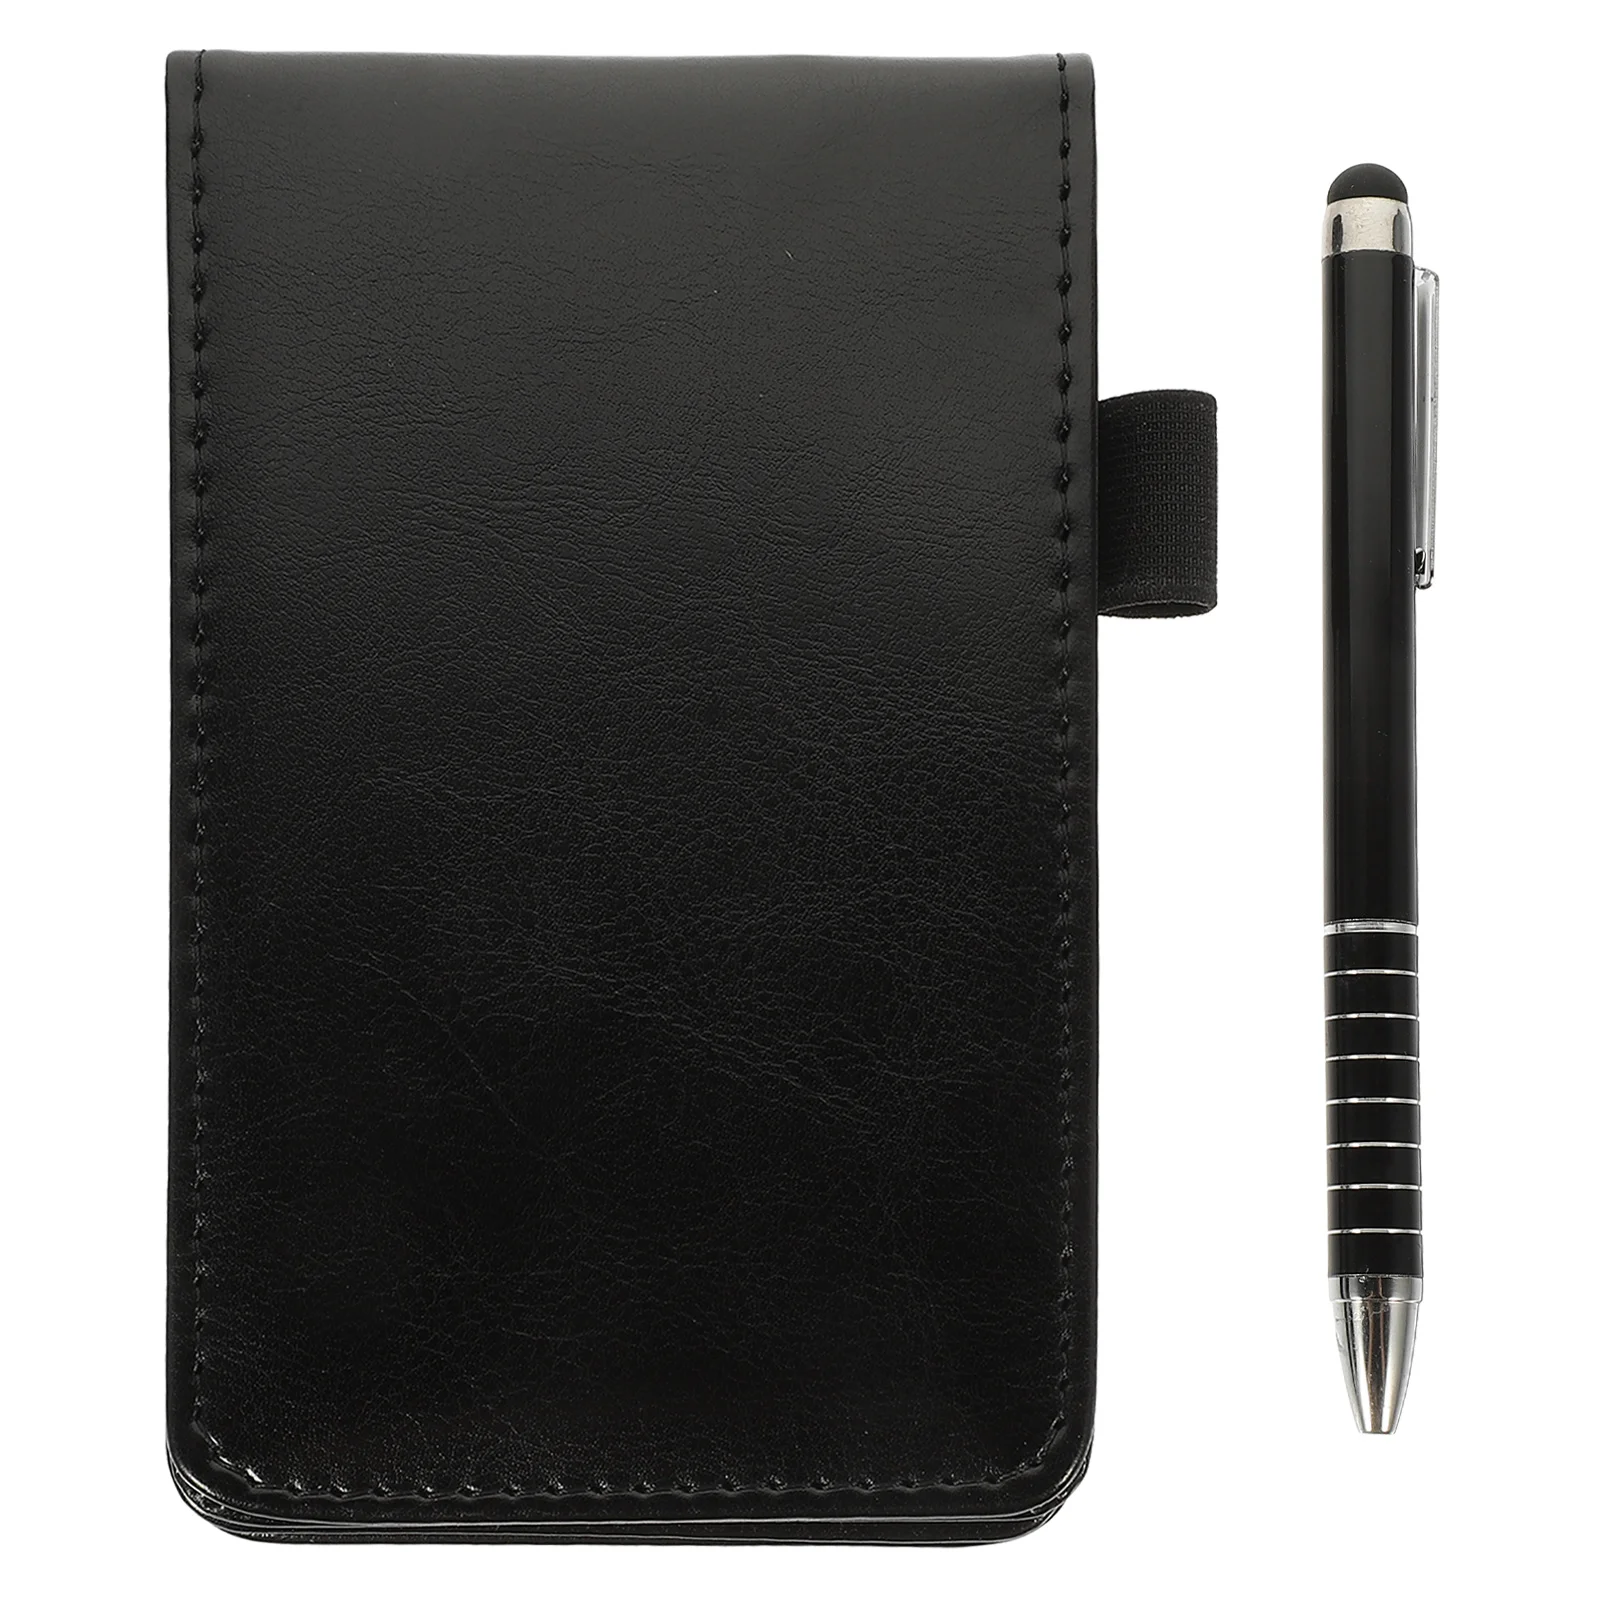 

Memo Pad Note Portable Work Accessory Mini Notepads Blank Business Metal Convenient Pocket Small Student Spiral